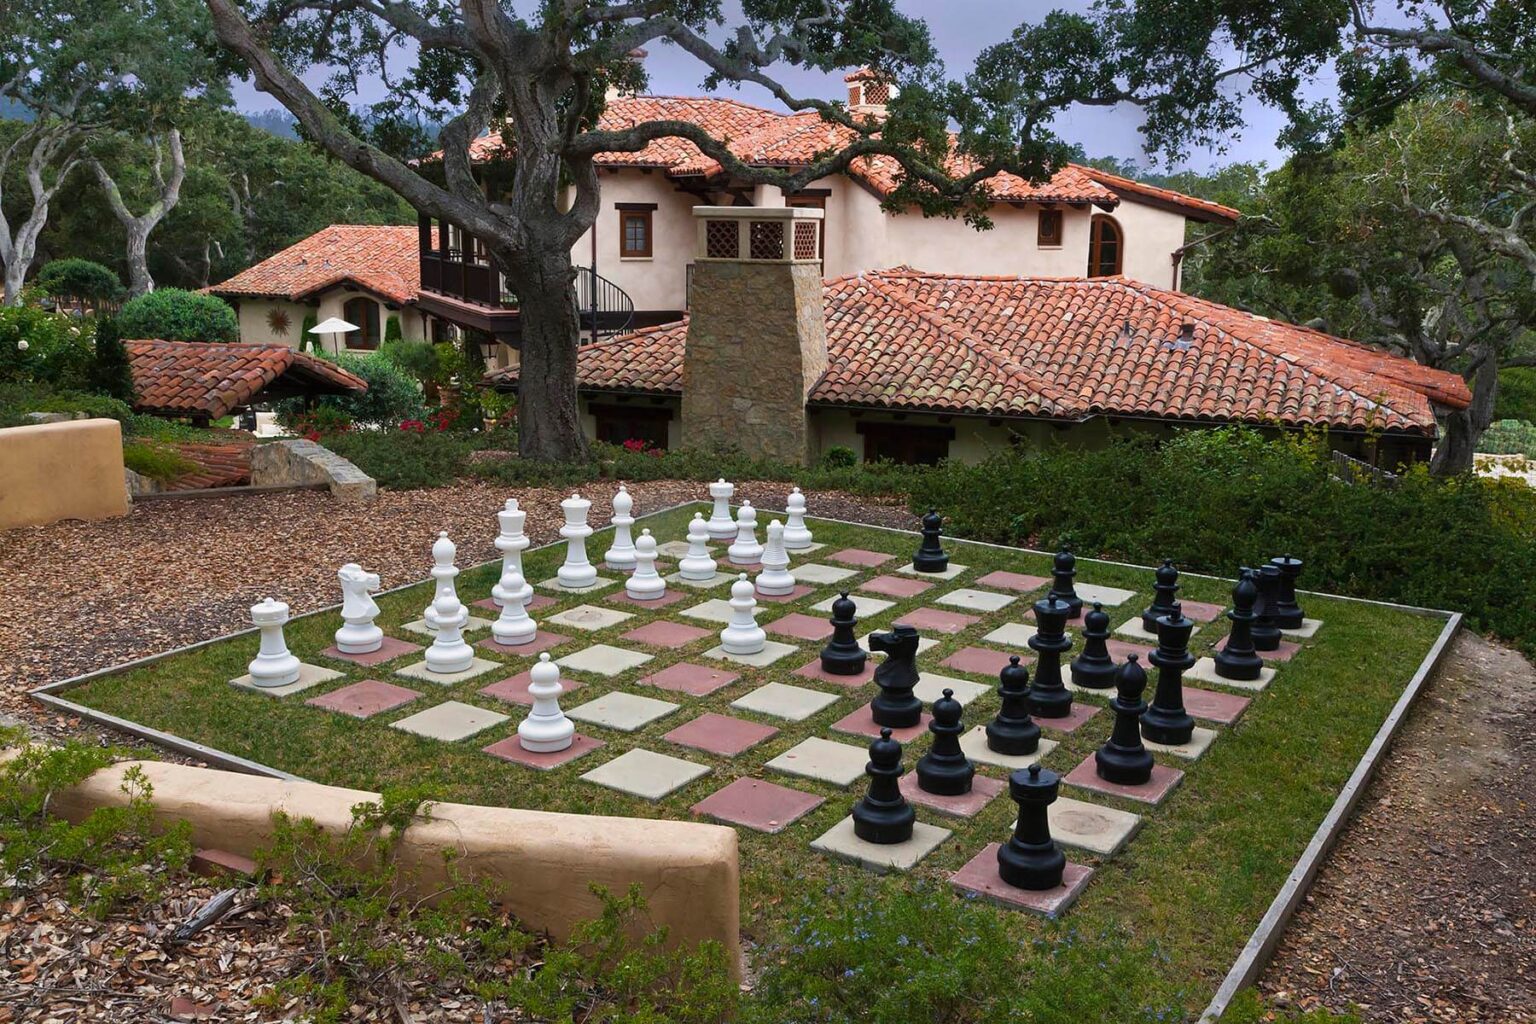 A giant chess set on the grounds of a California Spanish style home. - Architecture photography by Eagle Visions Photography